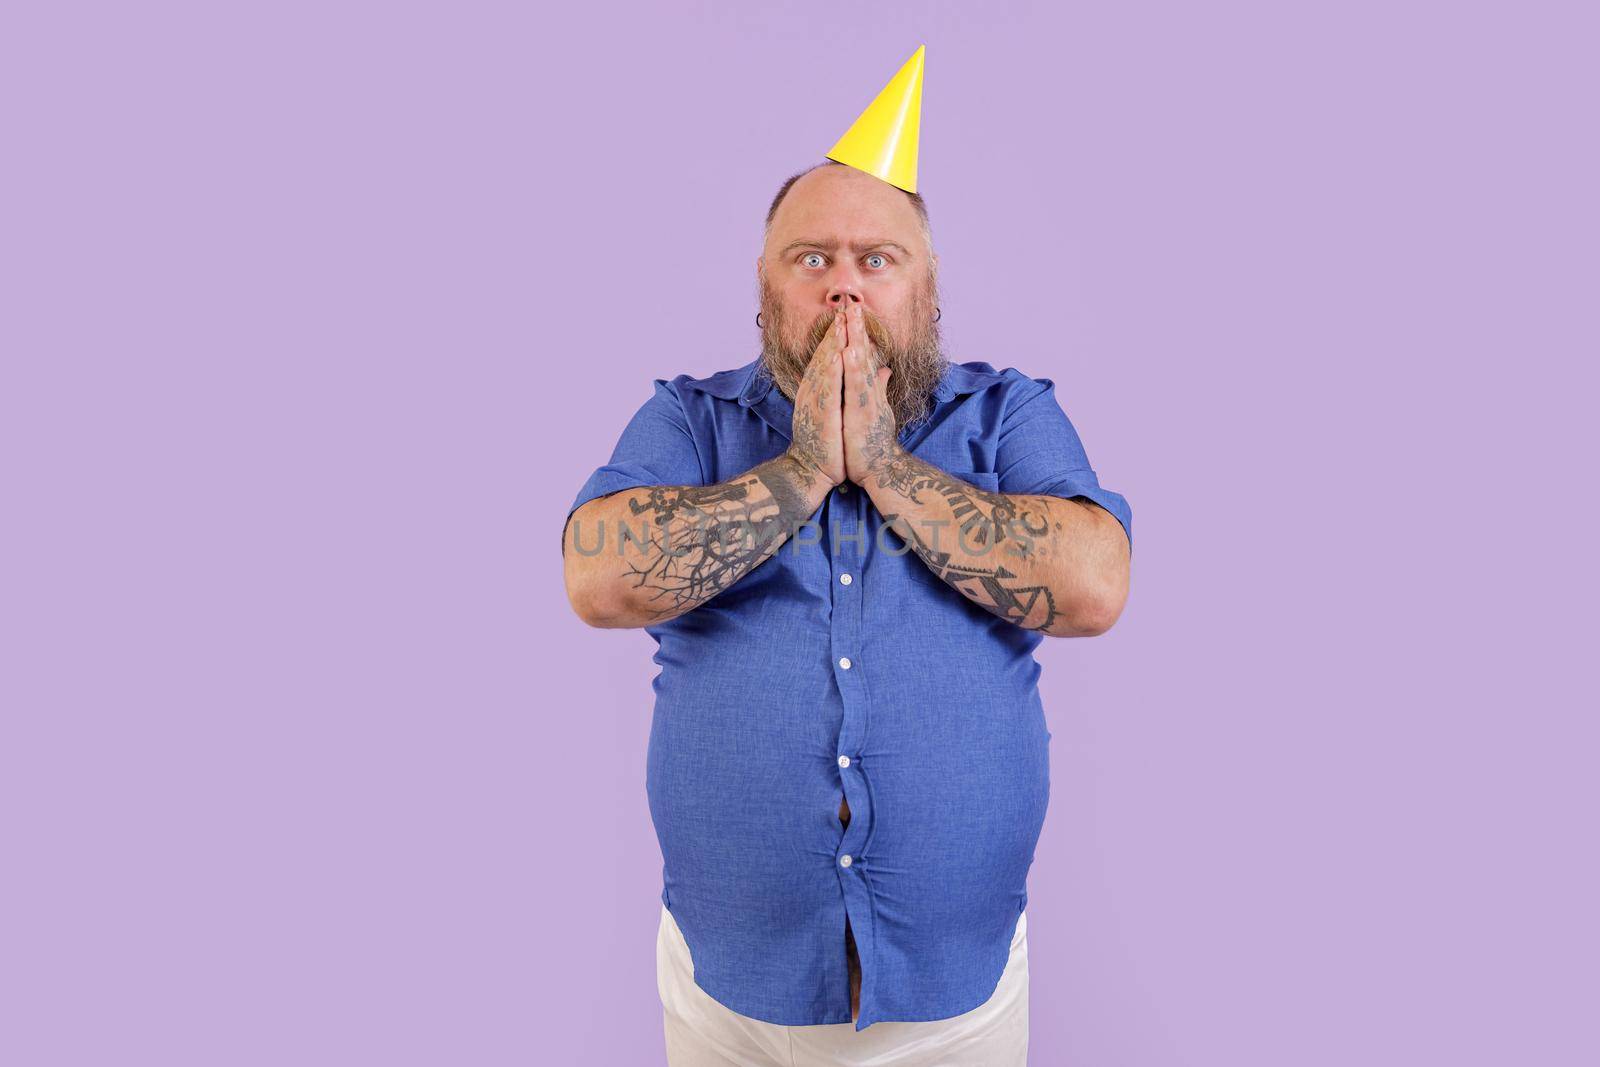 Expressive surprised bearded man with overweight in tight shirt holds hands over mouth standing on purple background in studio